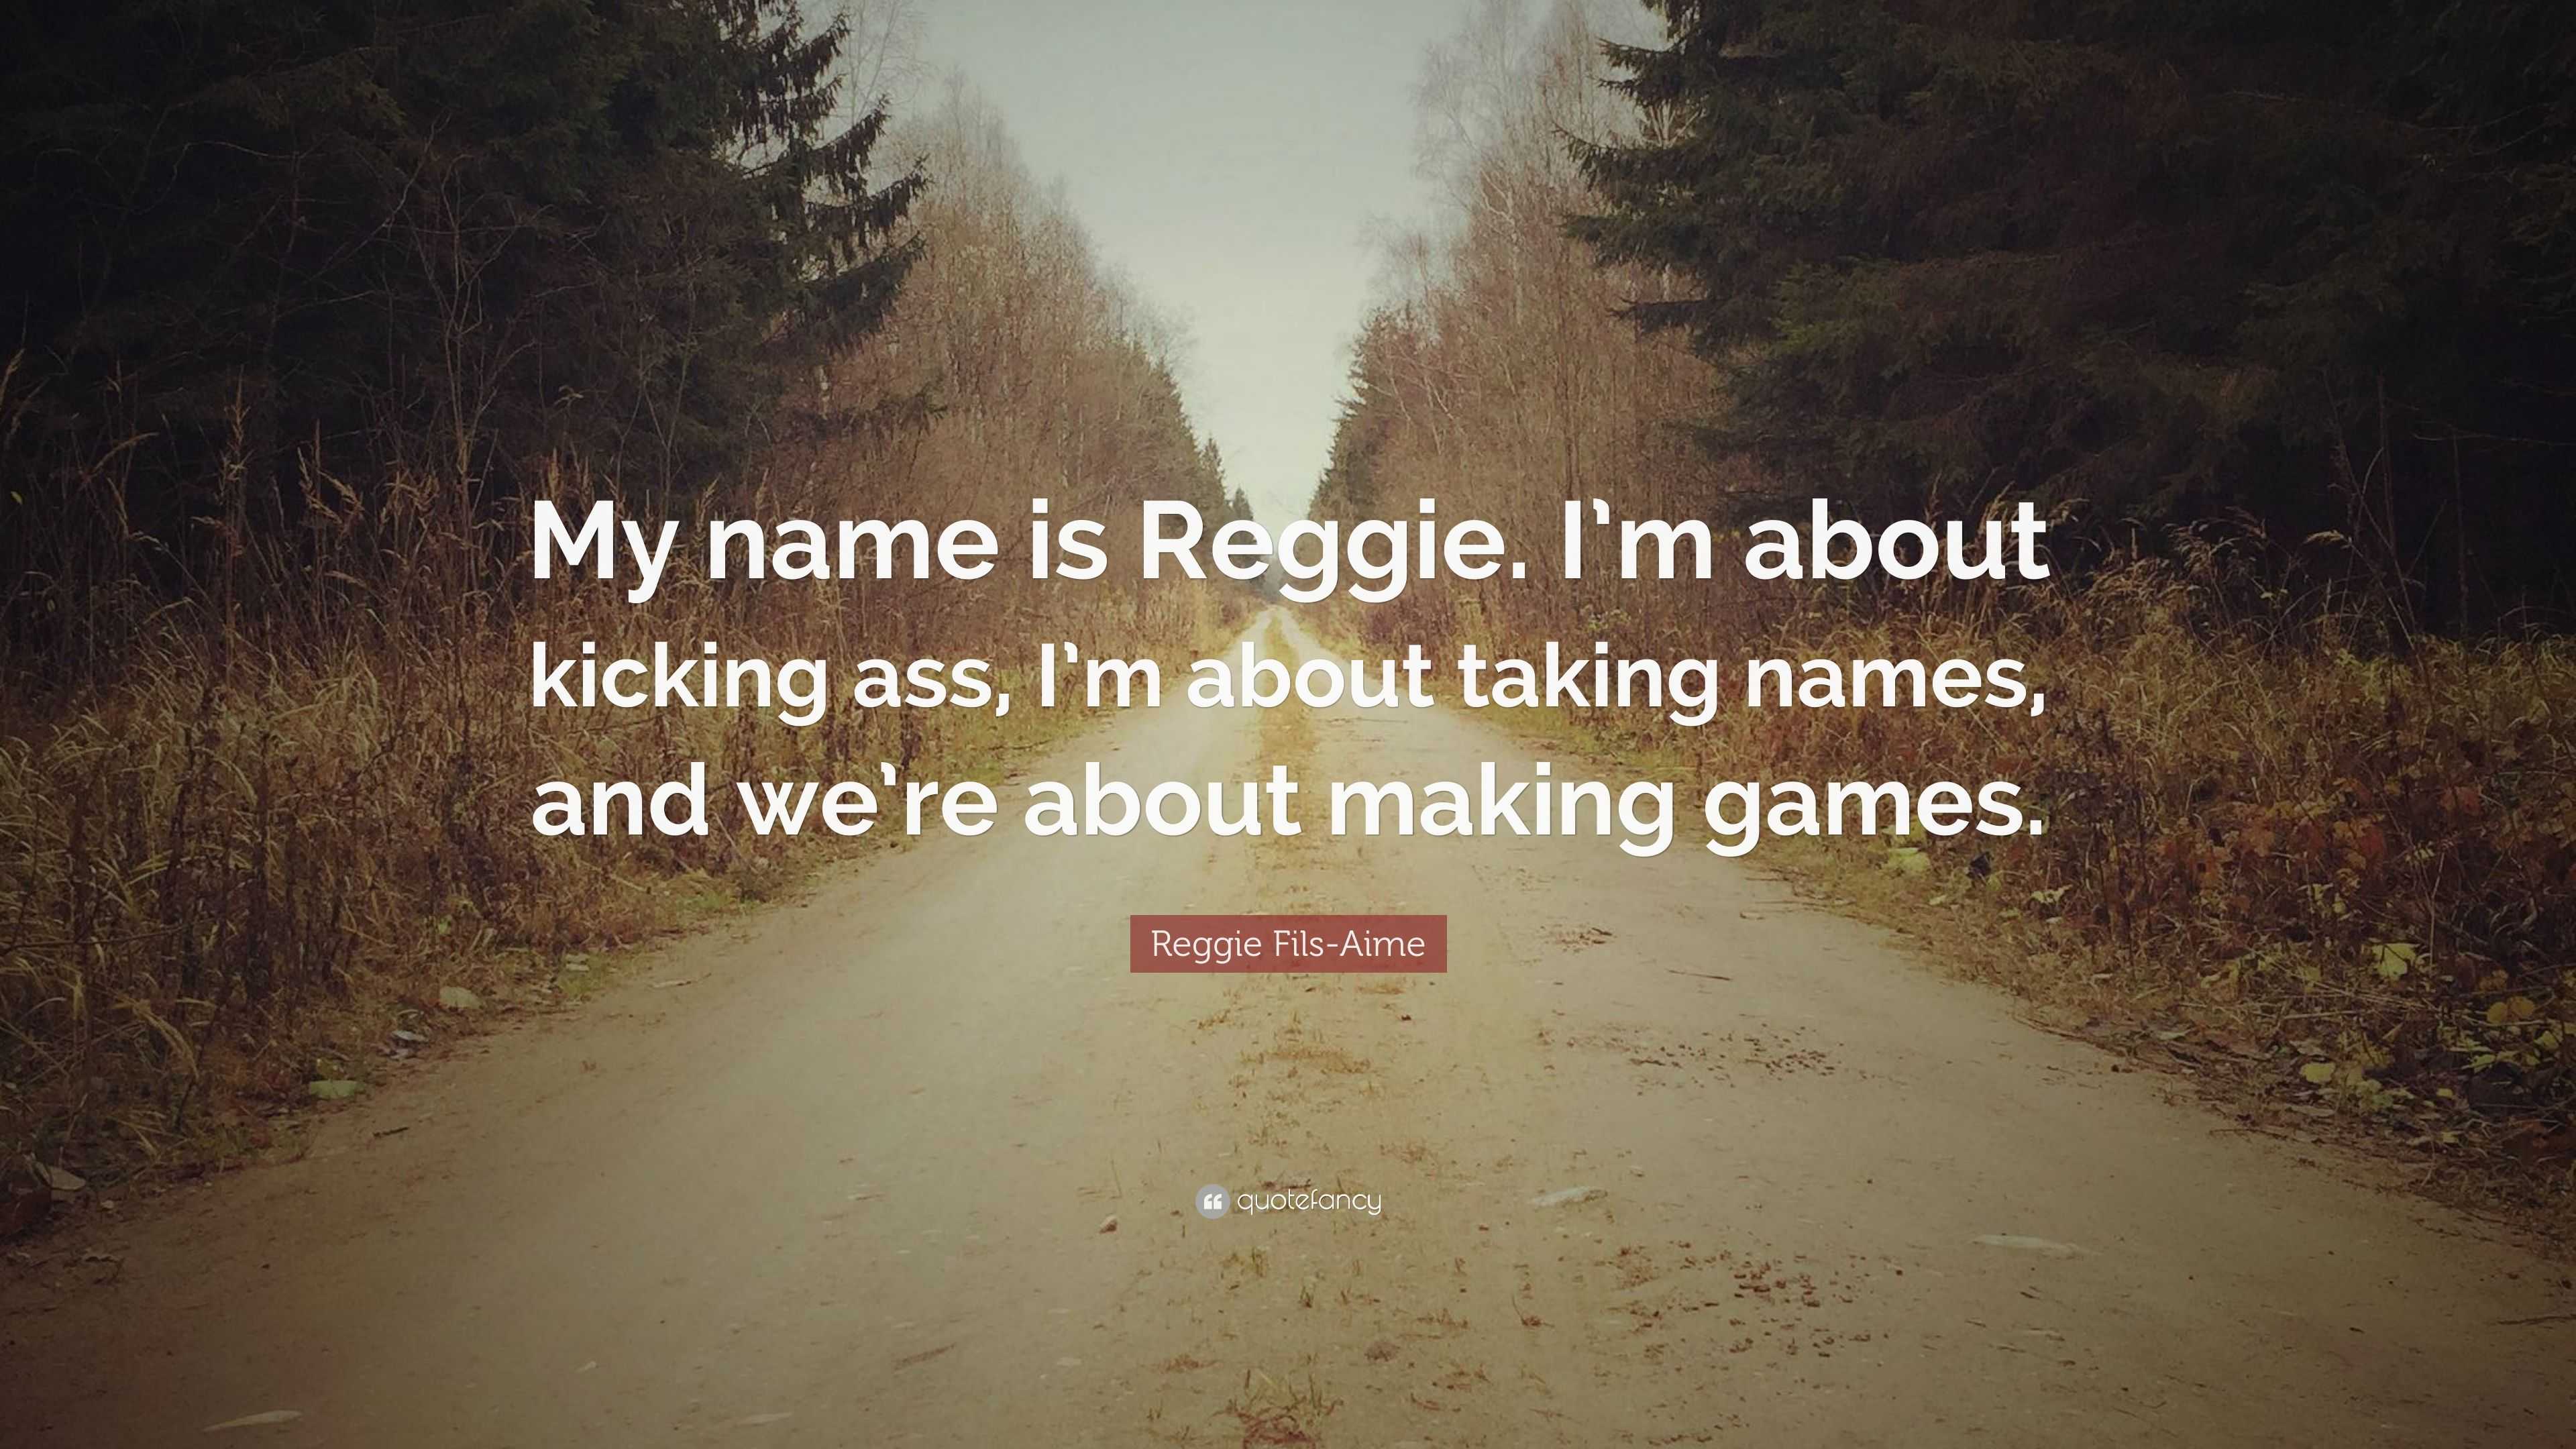 4580164-Reggie-Fils-Aime-Quote-My-name-is-Reggie-I-m-about-kicking-ass-I-m.jpg